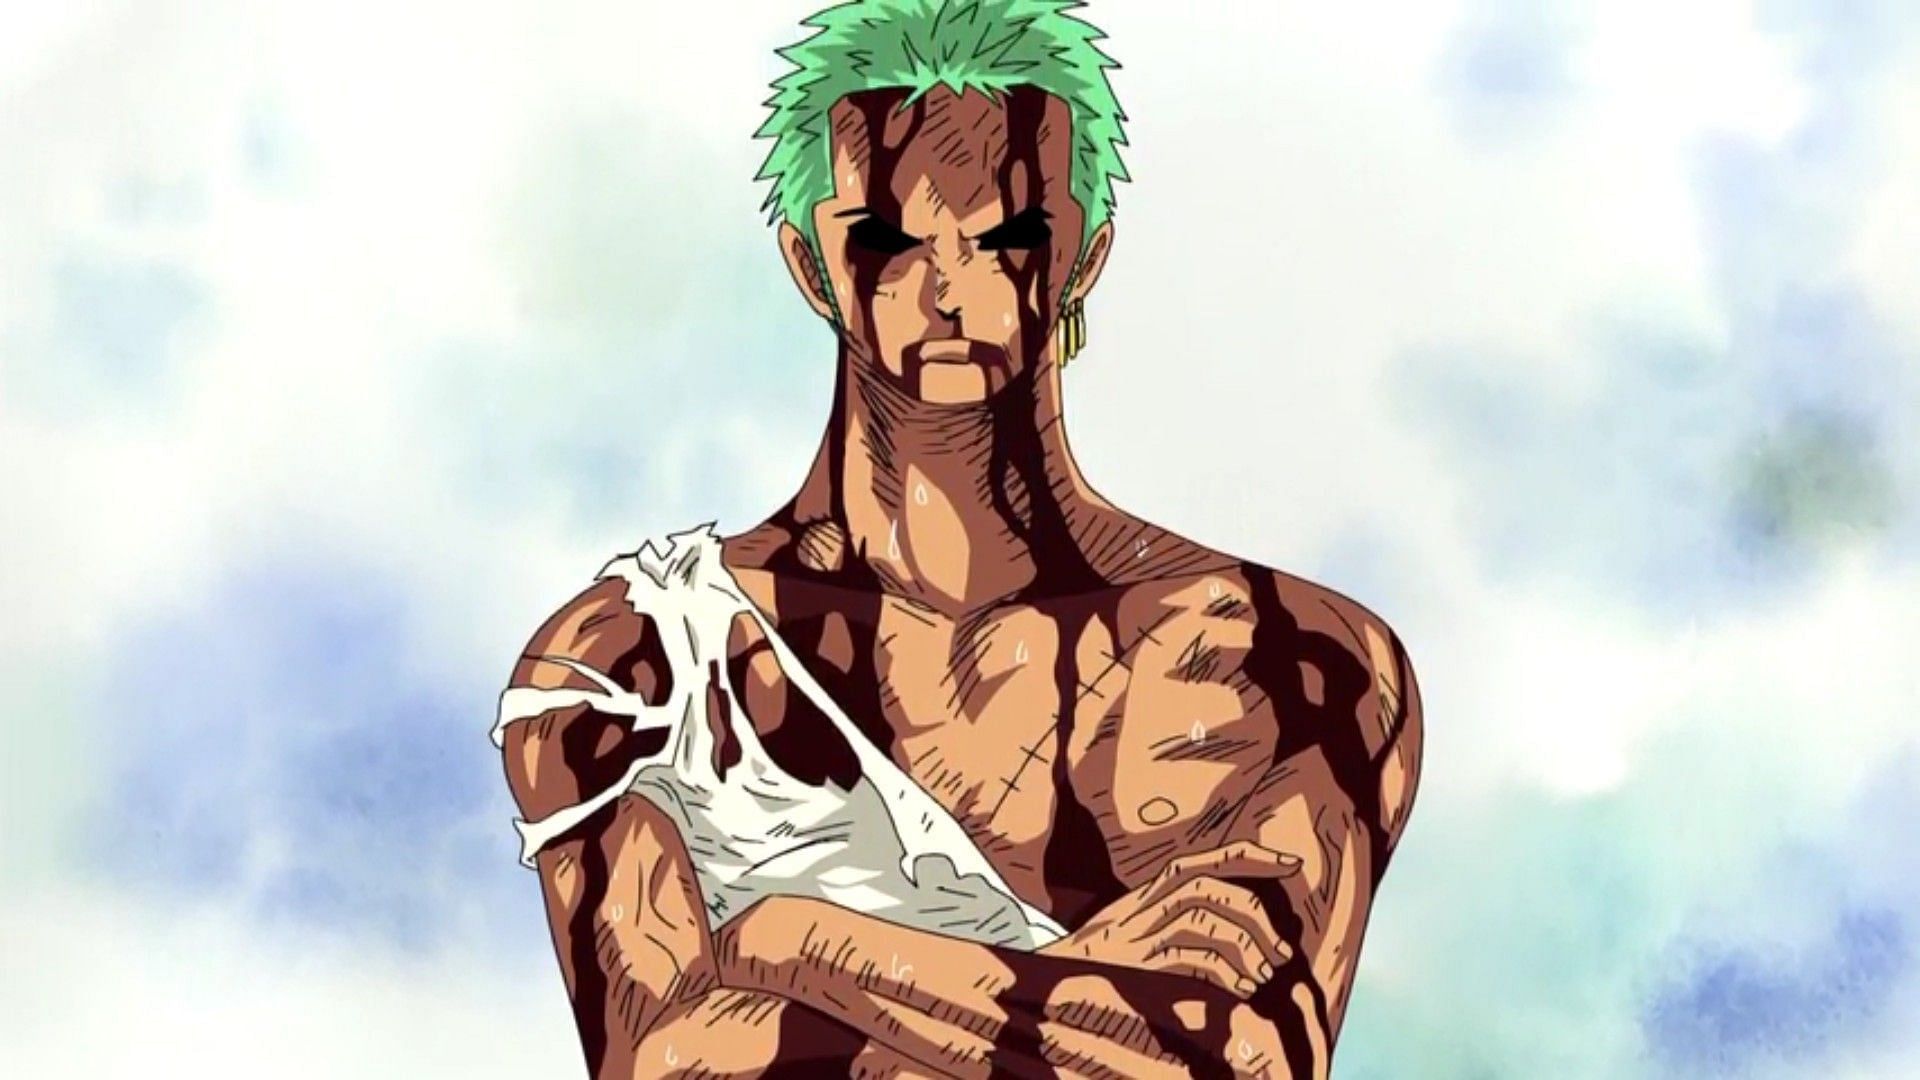 Zoro as seen during Thriller Bark in One Piece (Image via Toei Animation)